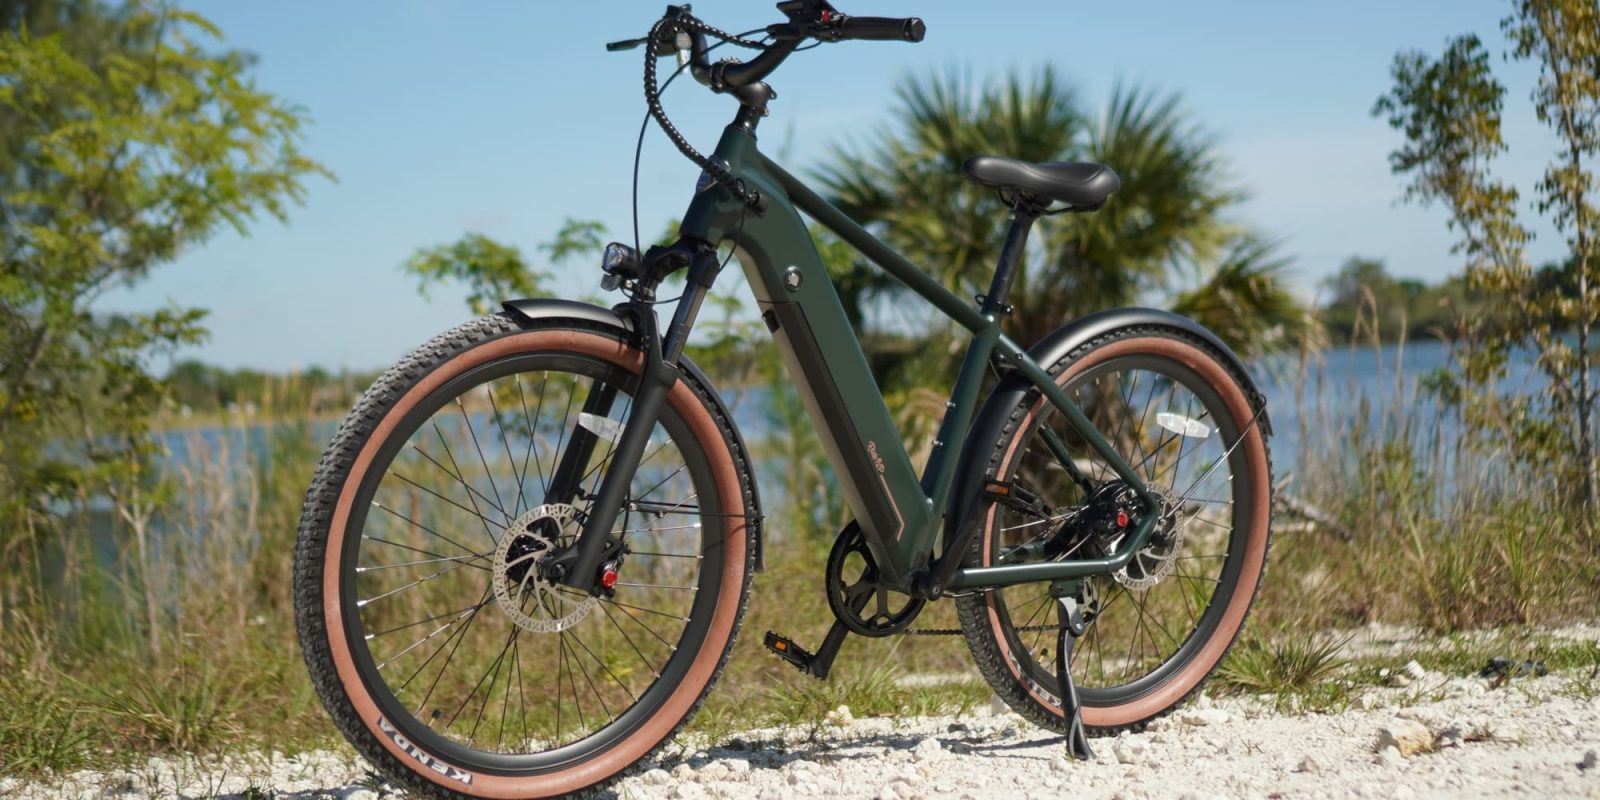 A low-cost touring e-bike that feels pricier